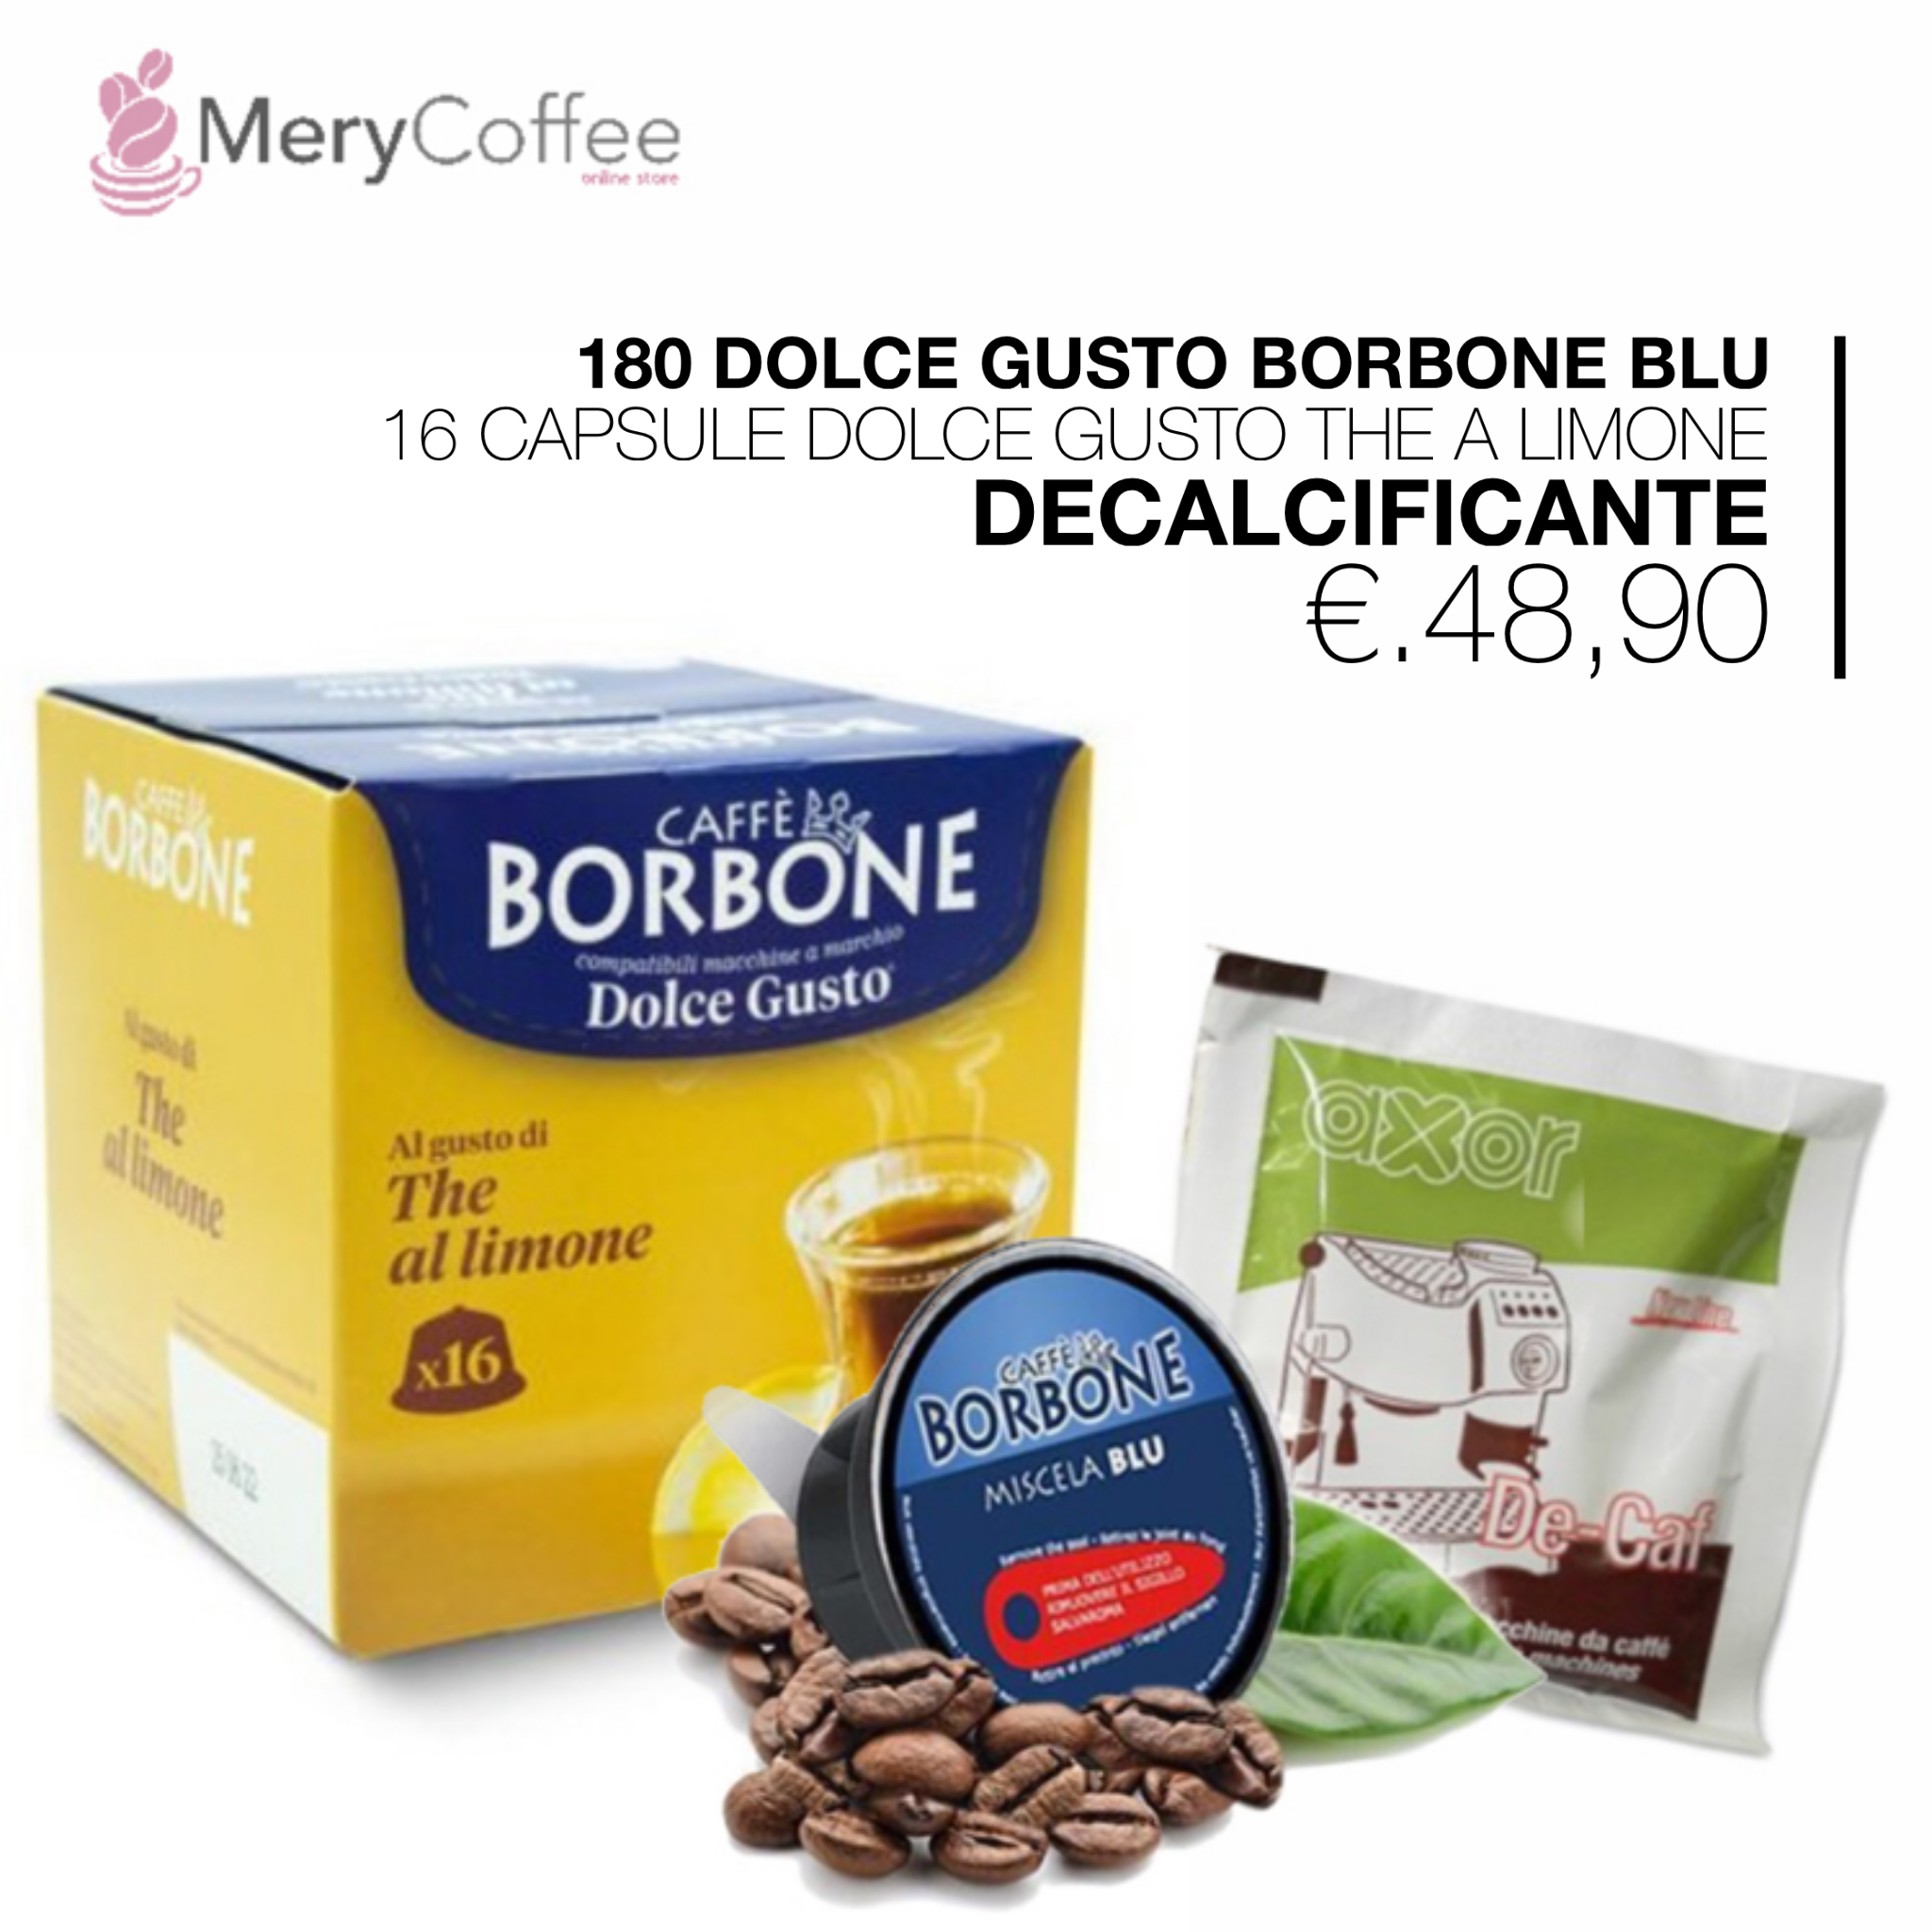 180 dolce gusto borbone blu+16 capsule dolce gusto the a limone +